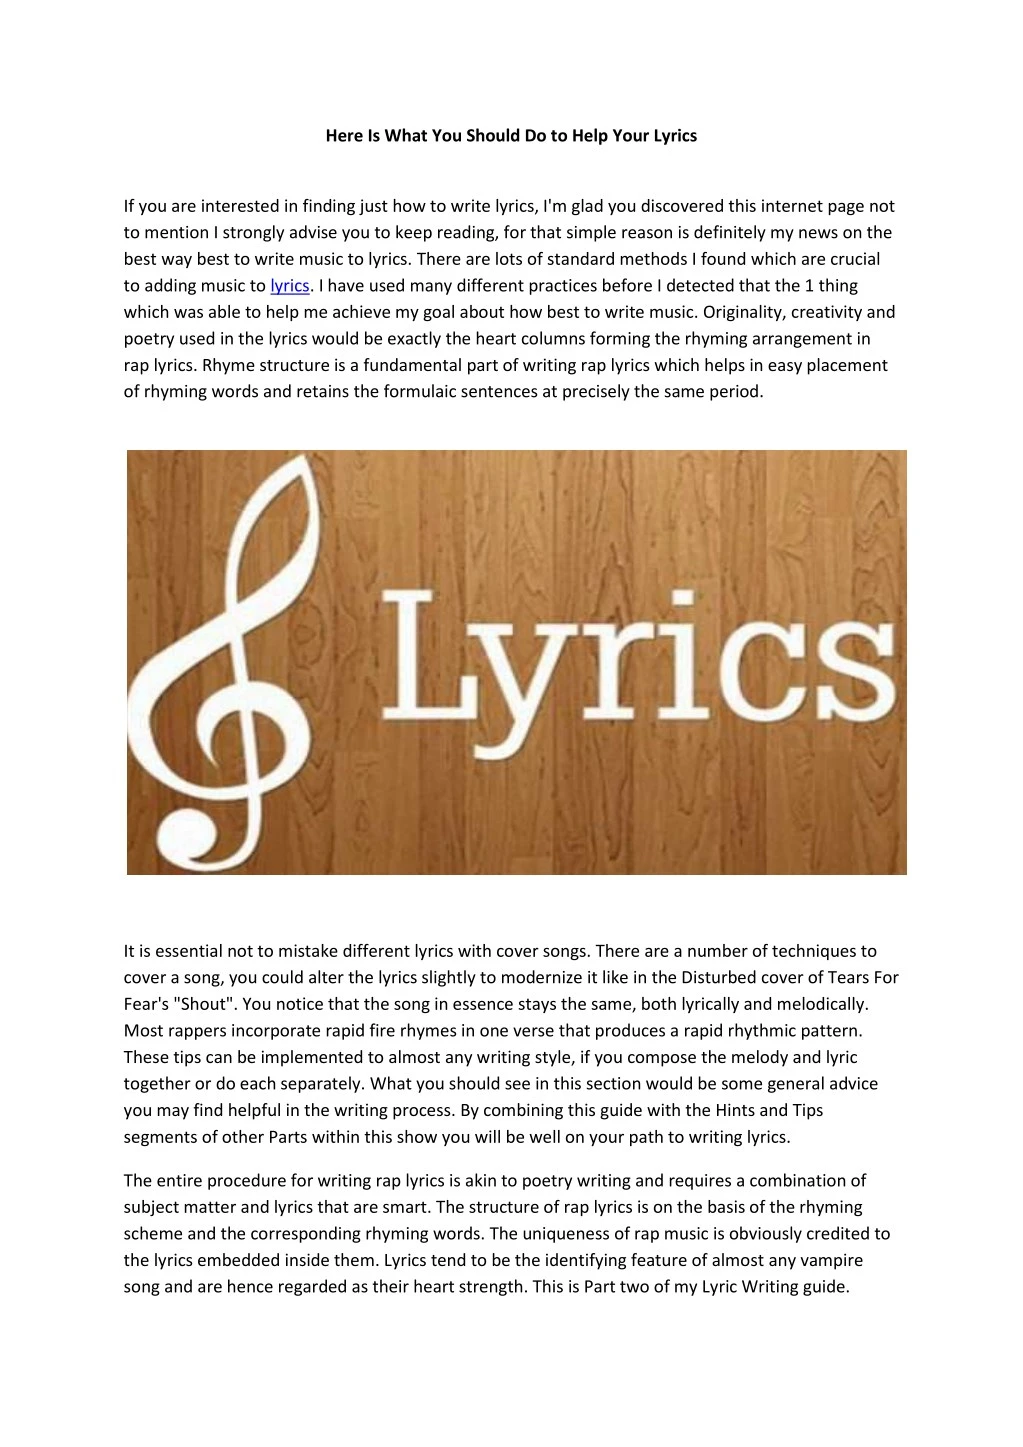 here is what you should do to help your lyrics